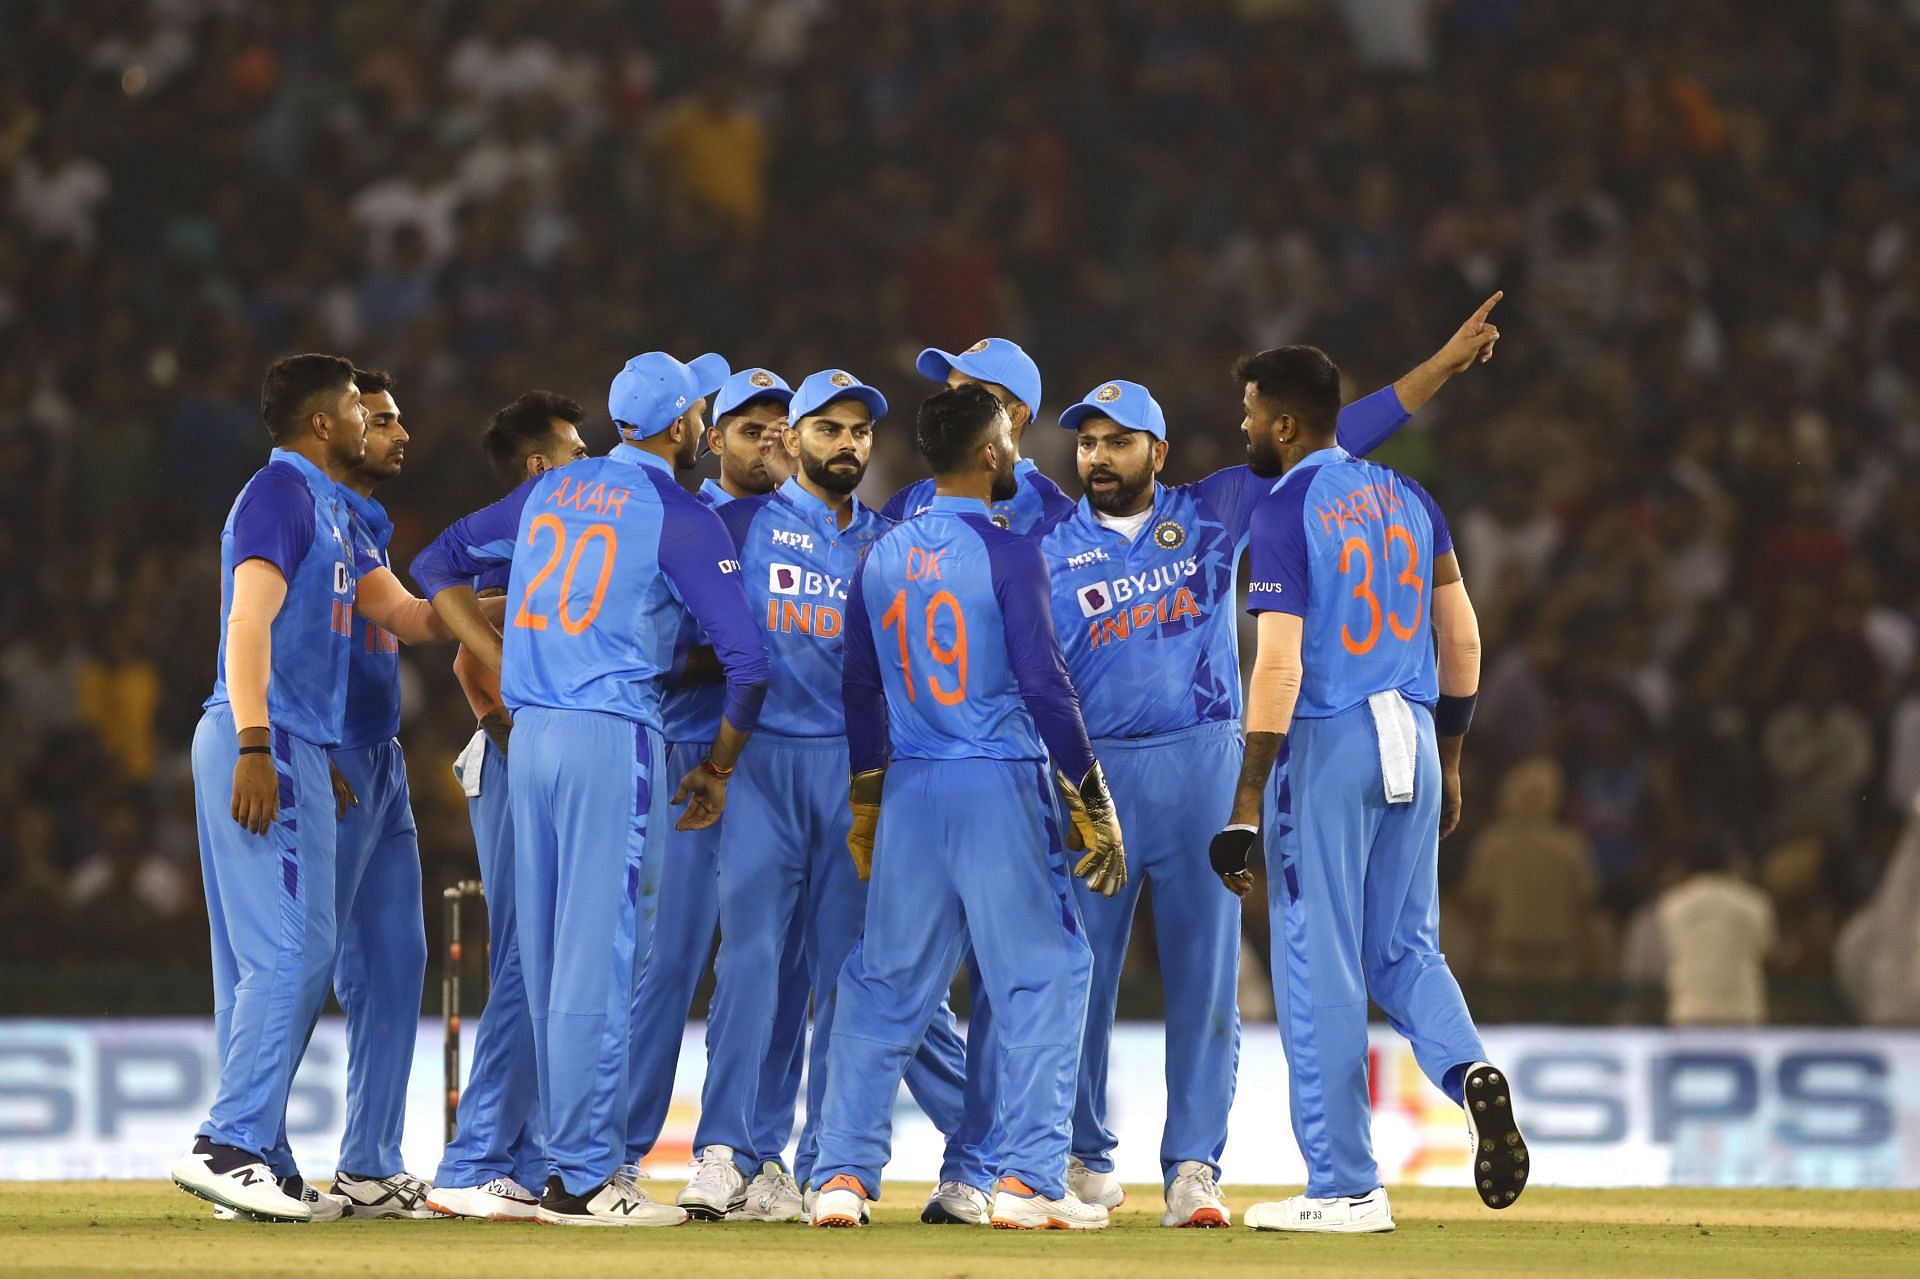 T20 World Cup 2022 Full schedule, squads, match timings and live streaming details